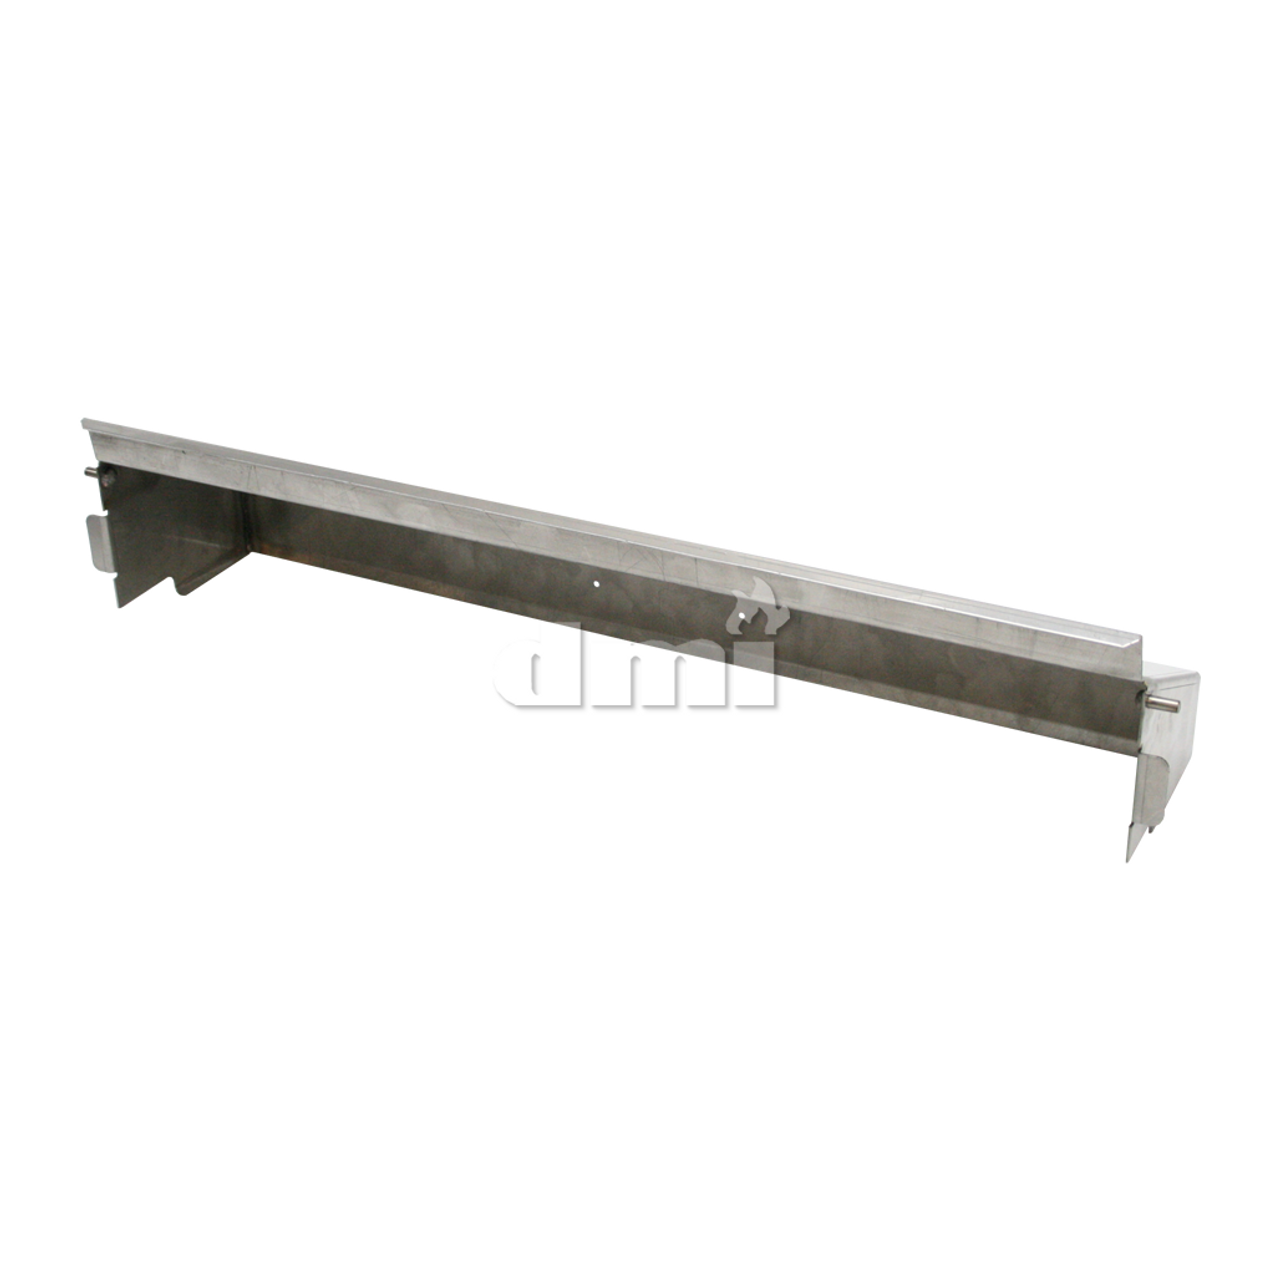 8321-1 Pivoting Discharge Awning (950,980,824A,824B,1424 models with catalytic converter)